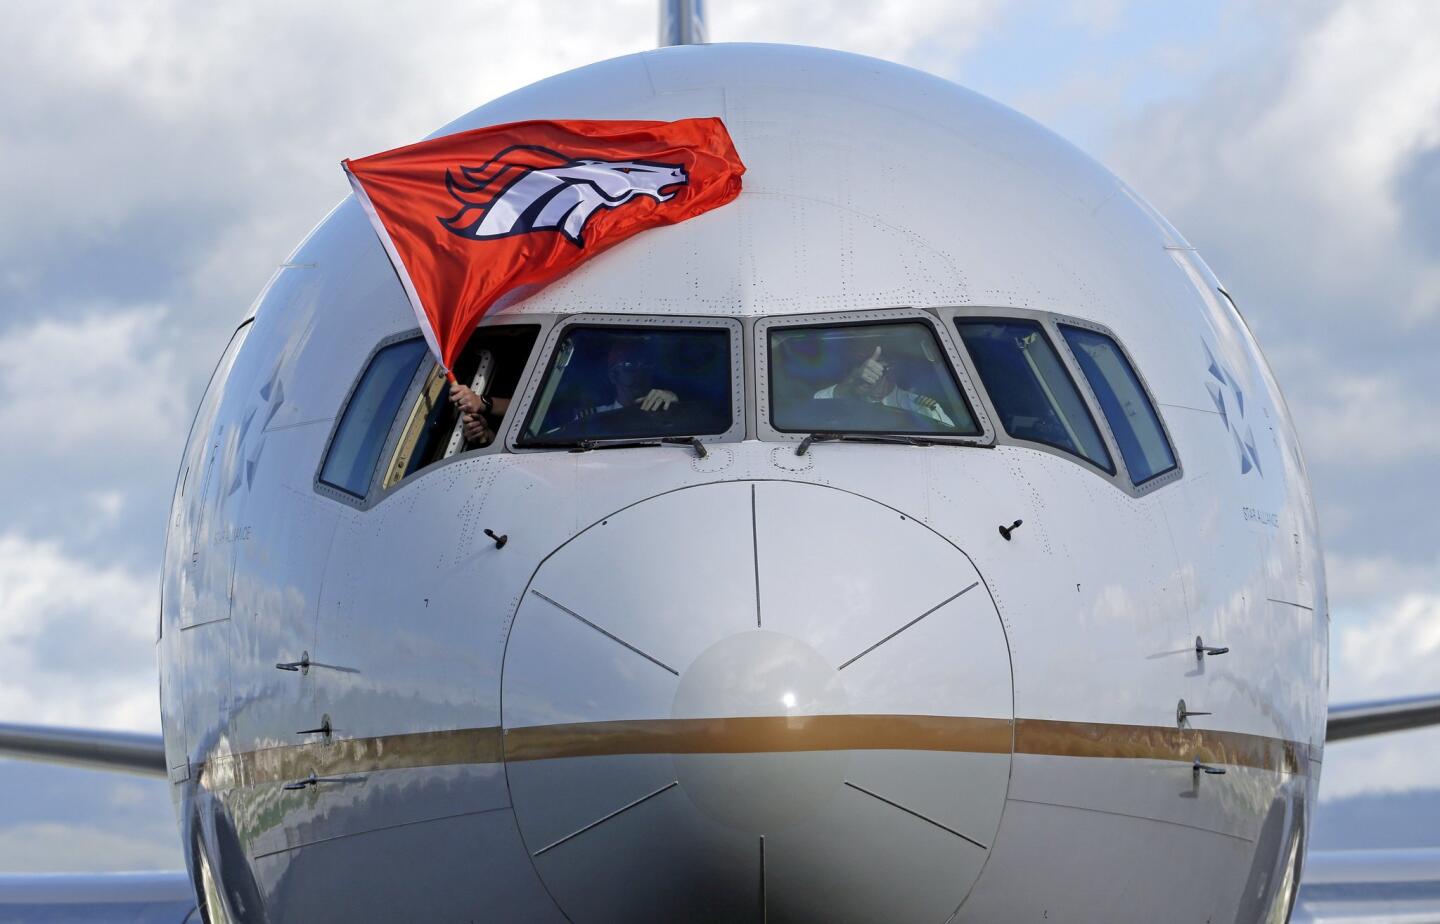 The plane carrying the Denver Broncos arrives at Mineta San Jose International Airport for the NFL Super Bowl football game Sunday, Jan. 31, 2016, in San Jose, Calif. The Broncos play the Carolina Panthers on Sunday, Feb. 7, 2015, in Super Bowl 50. (AP Photo/Charlie Riedel)